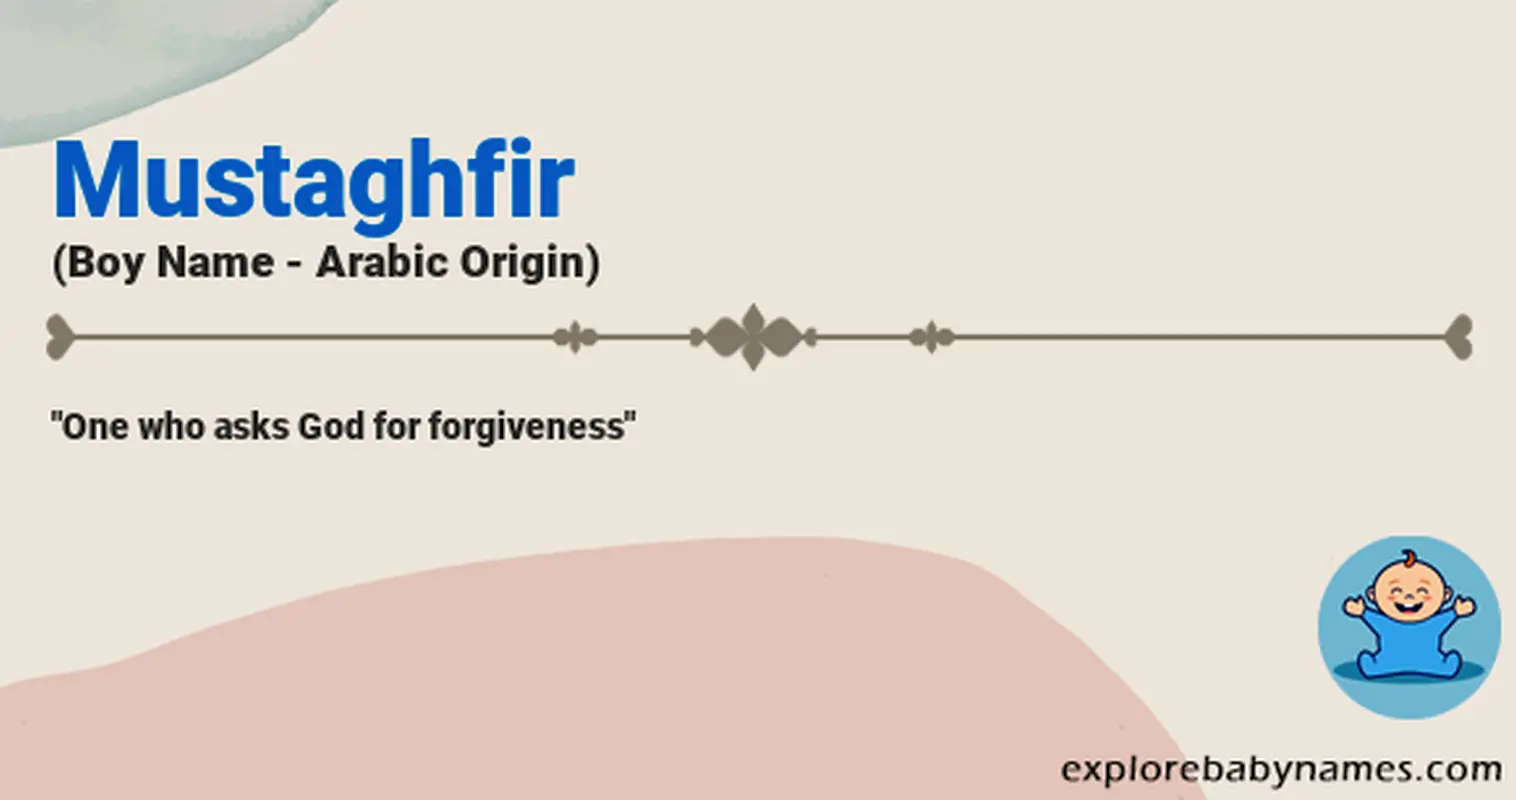 Meaning of Mustaghfir